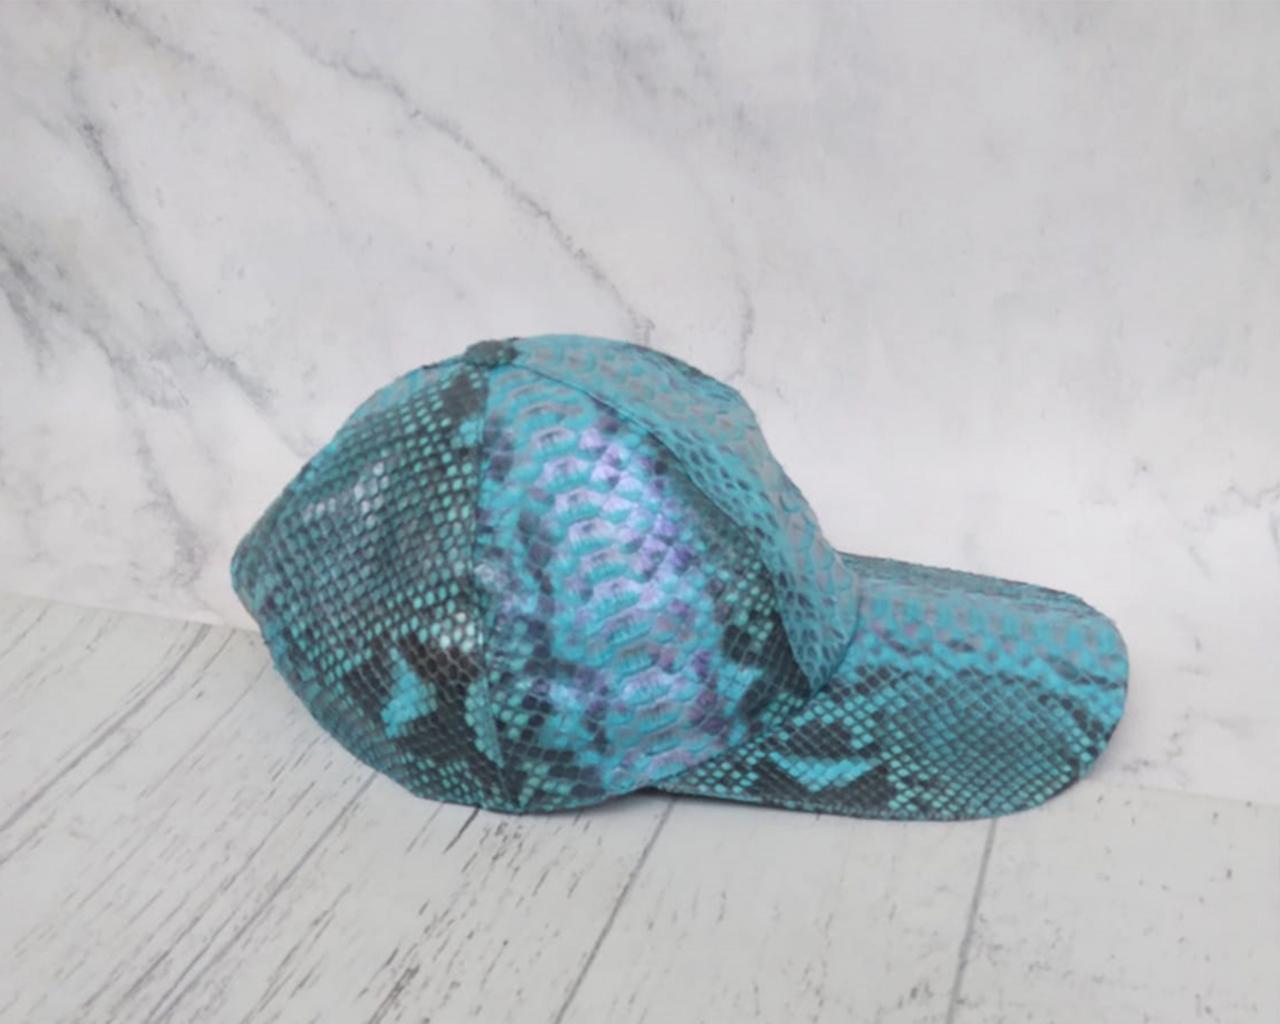 Python Snakeskin Hats for Men with Elastic Closure Caps Style